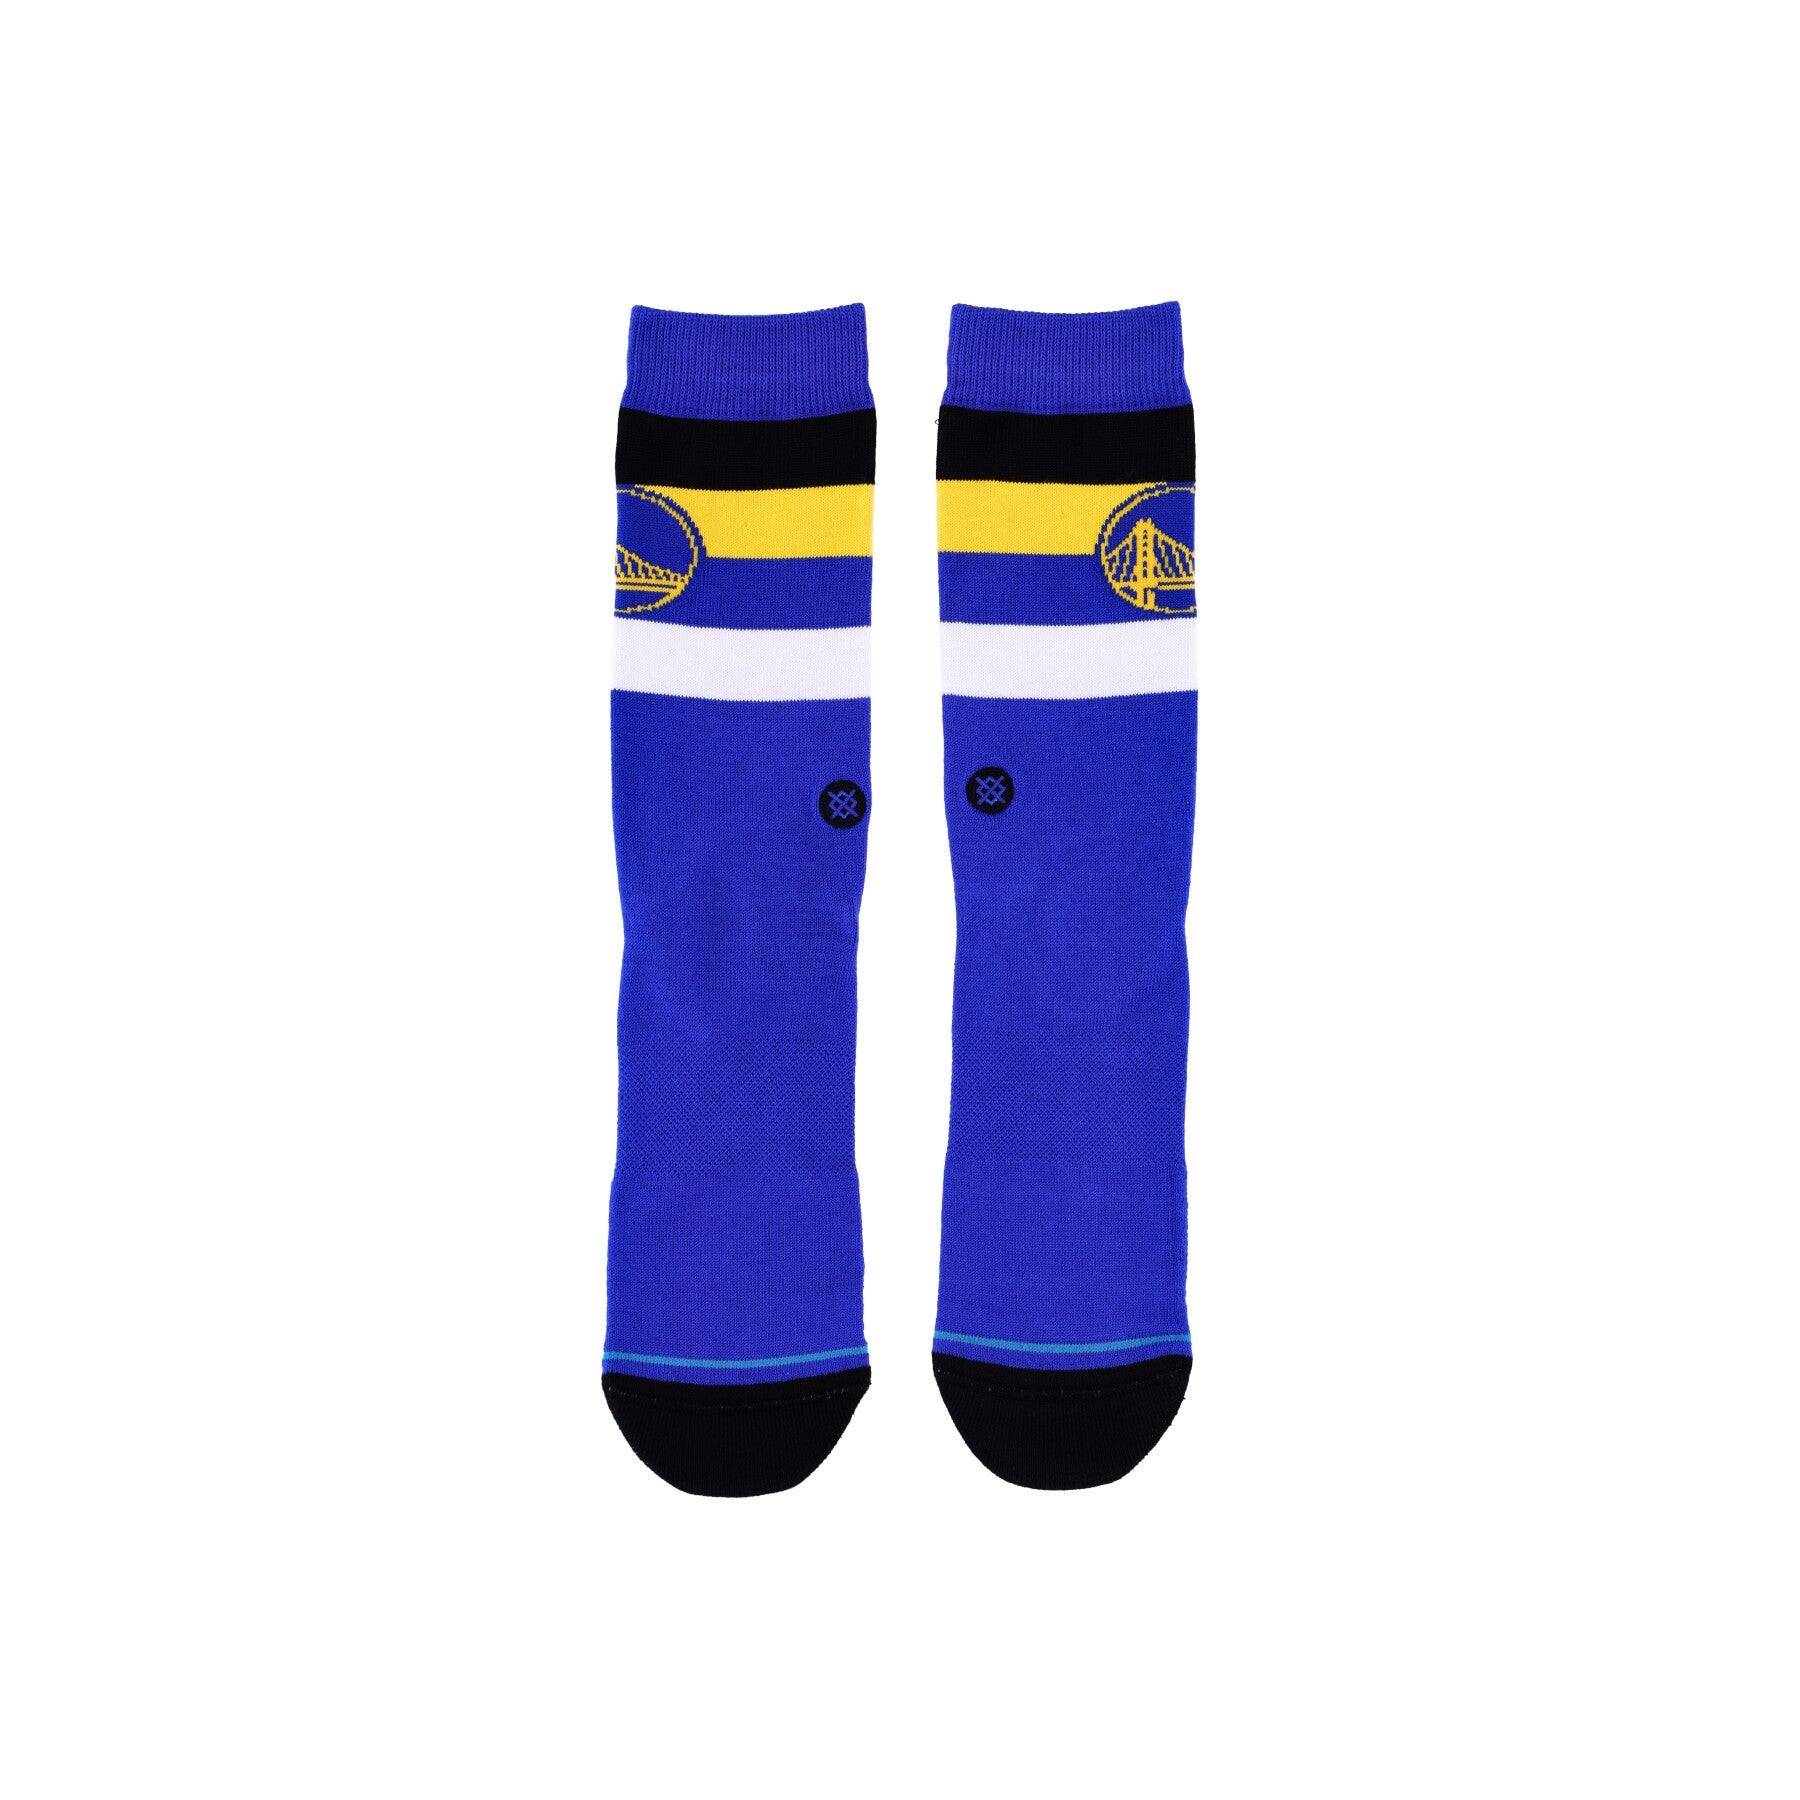 Stance, Calza Media Uomo Warriors St 2 Pack, Royal